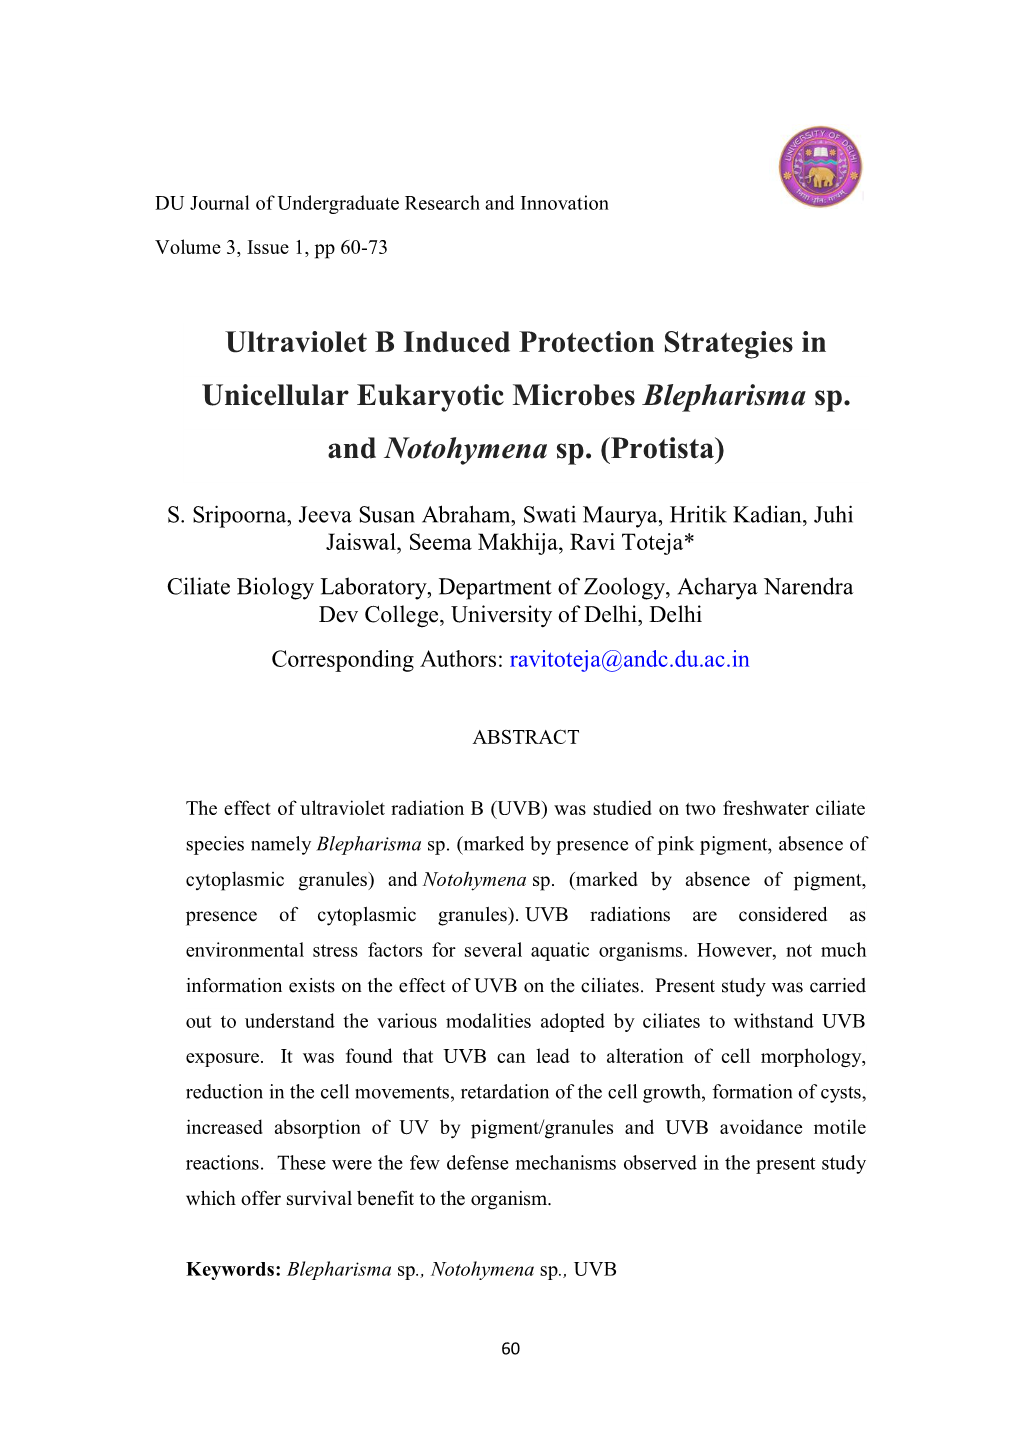 Ultraviolet B Induced Protection Strategies in Unicellular Eukaryotic Microbes Blepharisma Sp